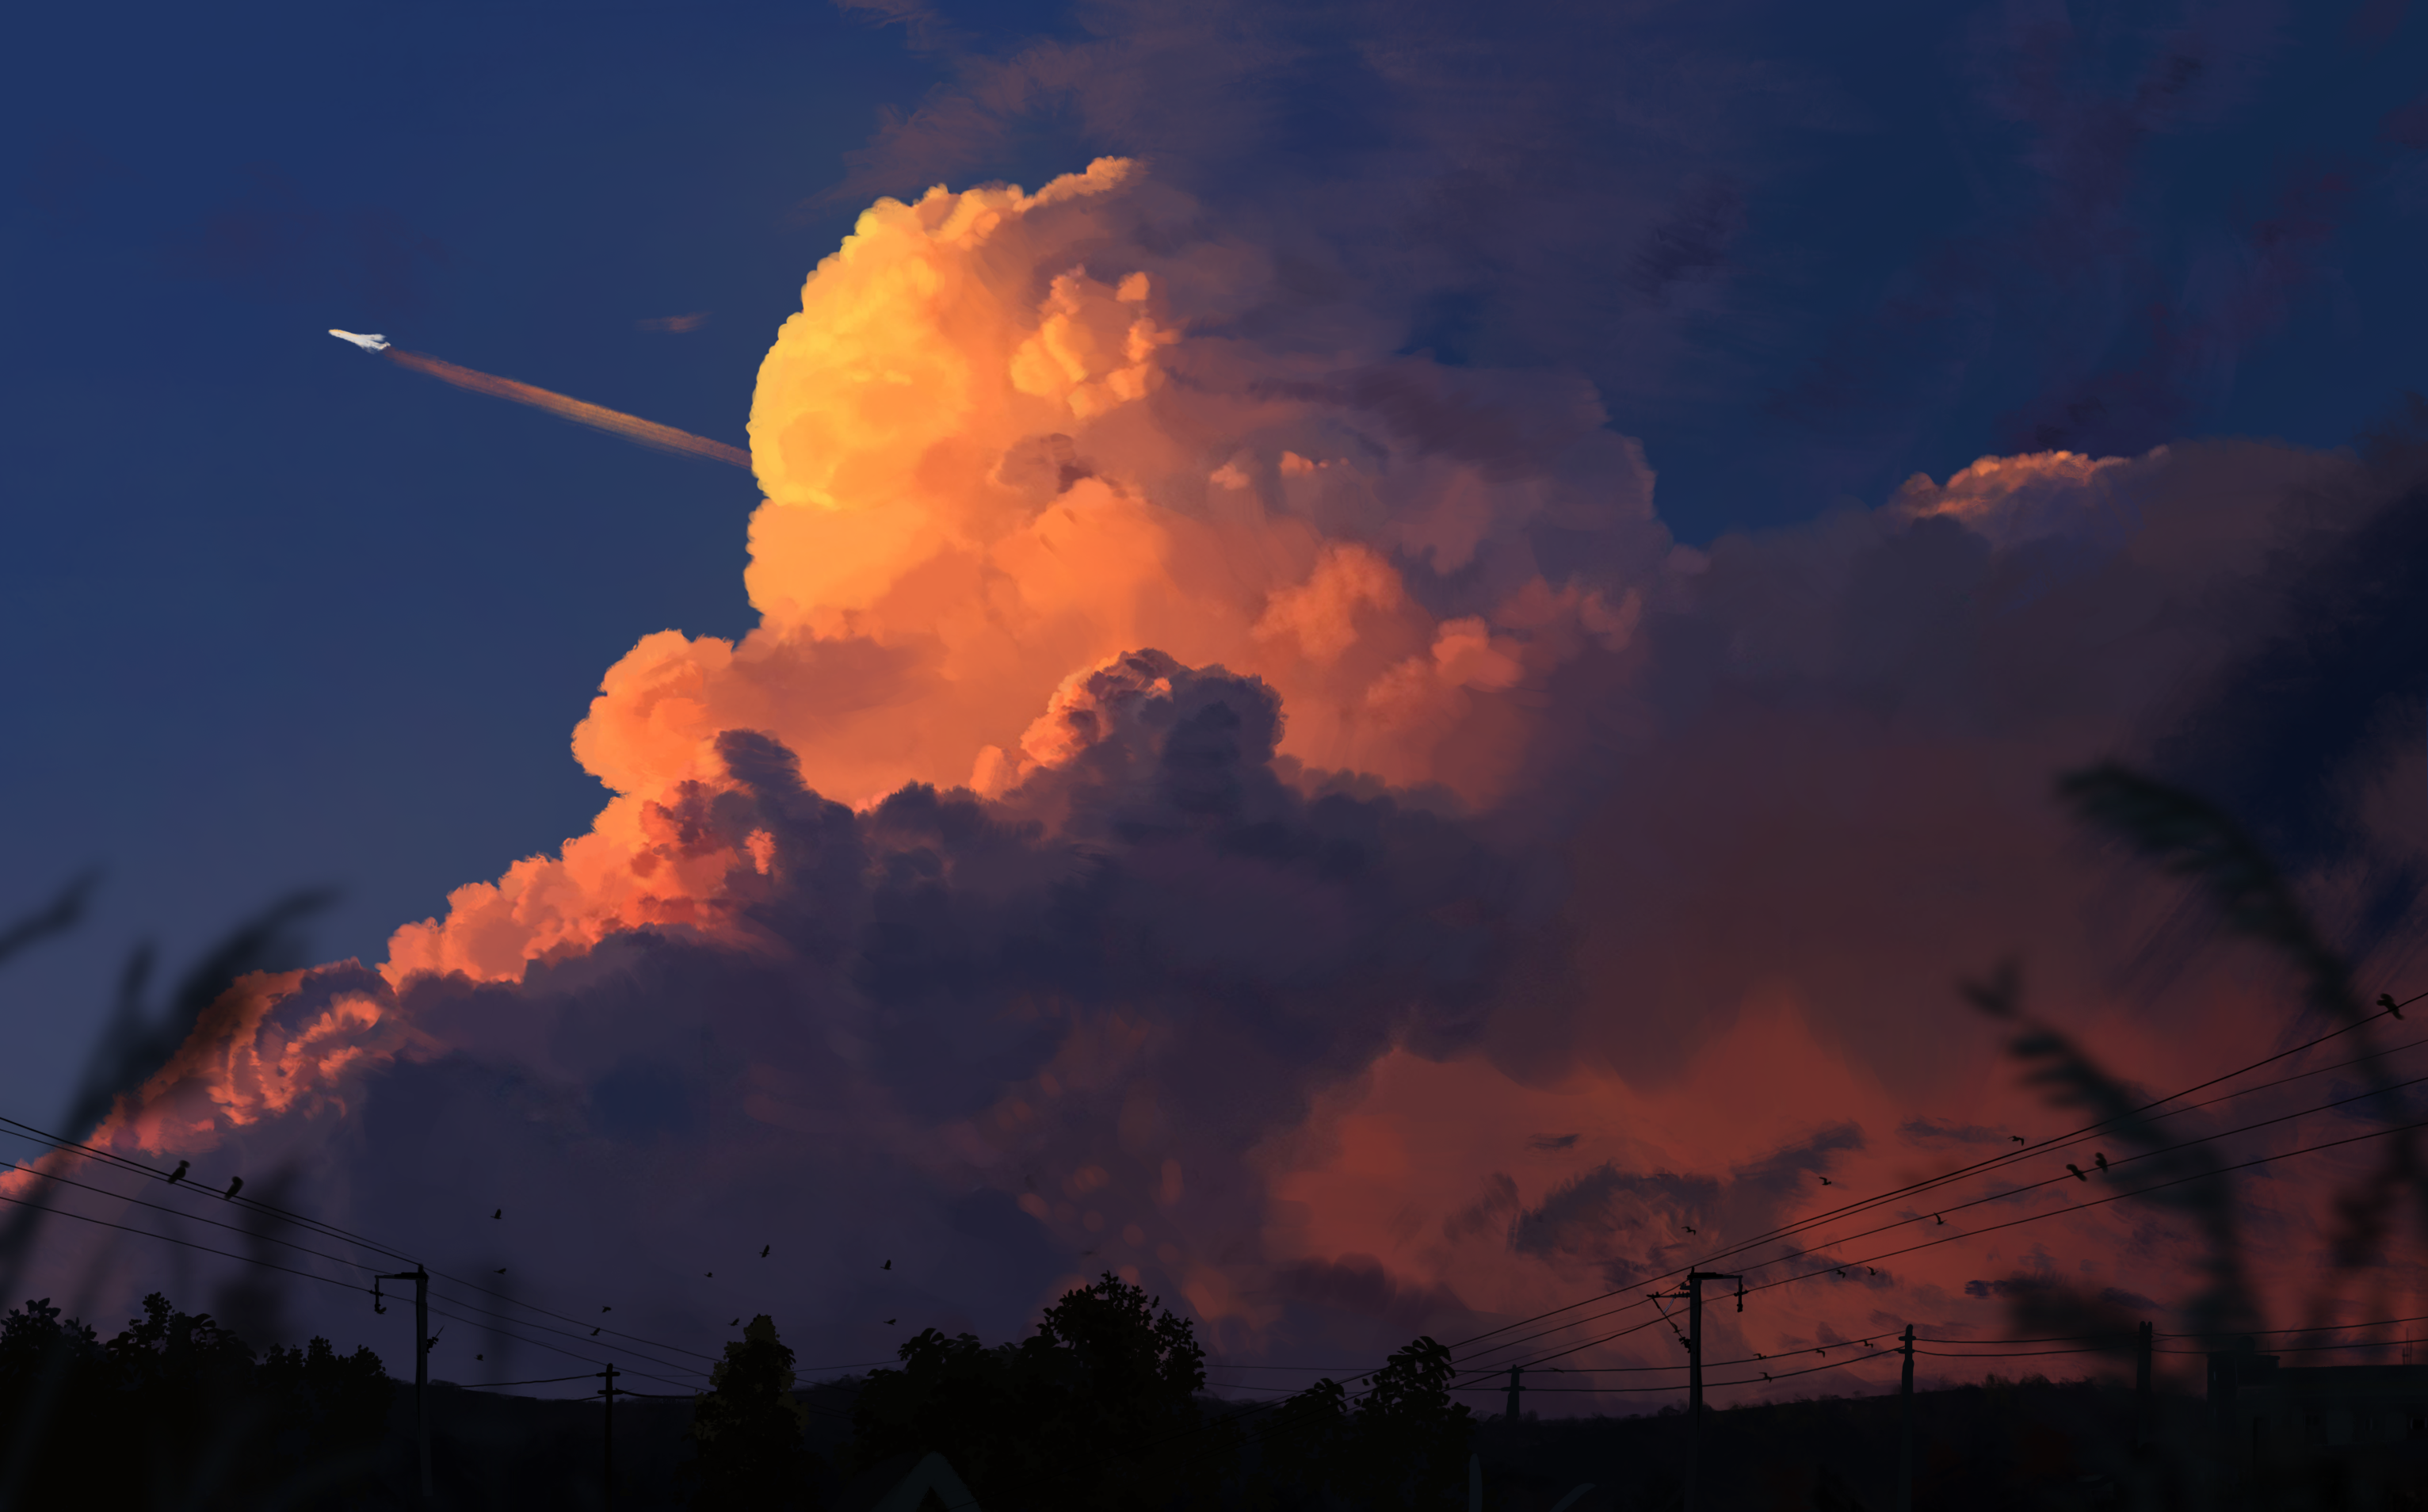 General 3064x1908 Yu jing illustration clouds sunset glow sunset aircraft sky utility pole outdoors dark power lines